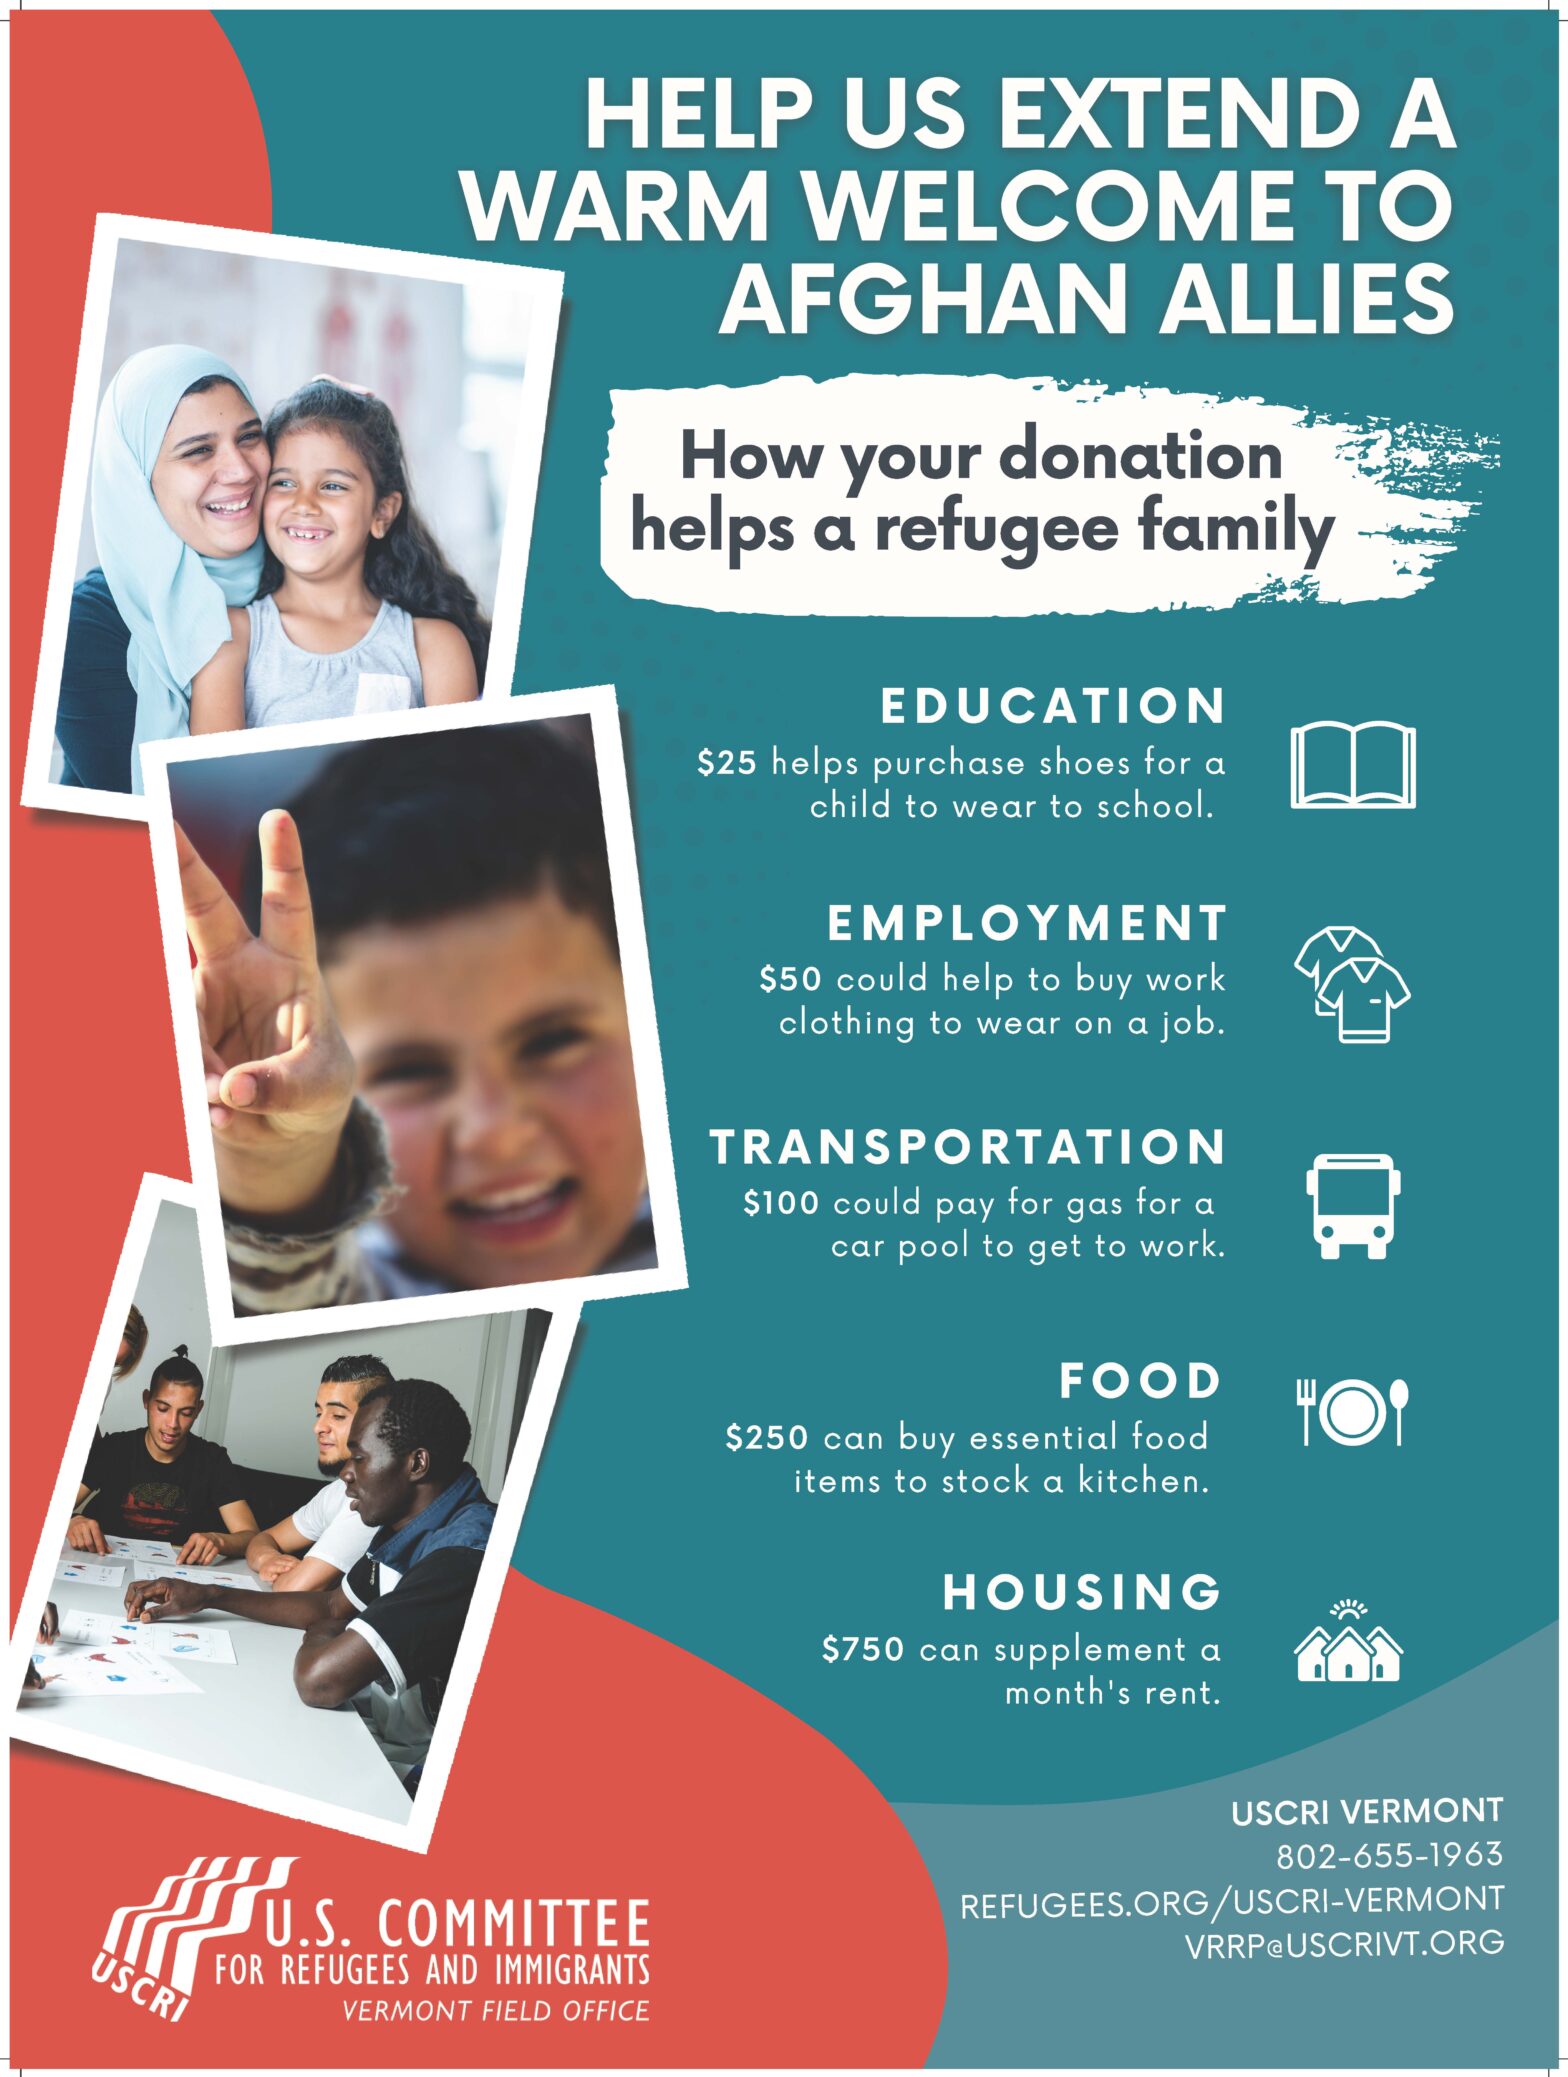 Help Us Extend a Warm Welcome to Afghan Allies